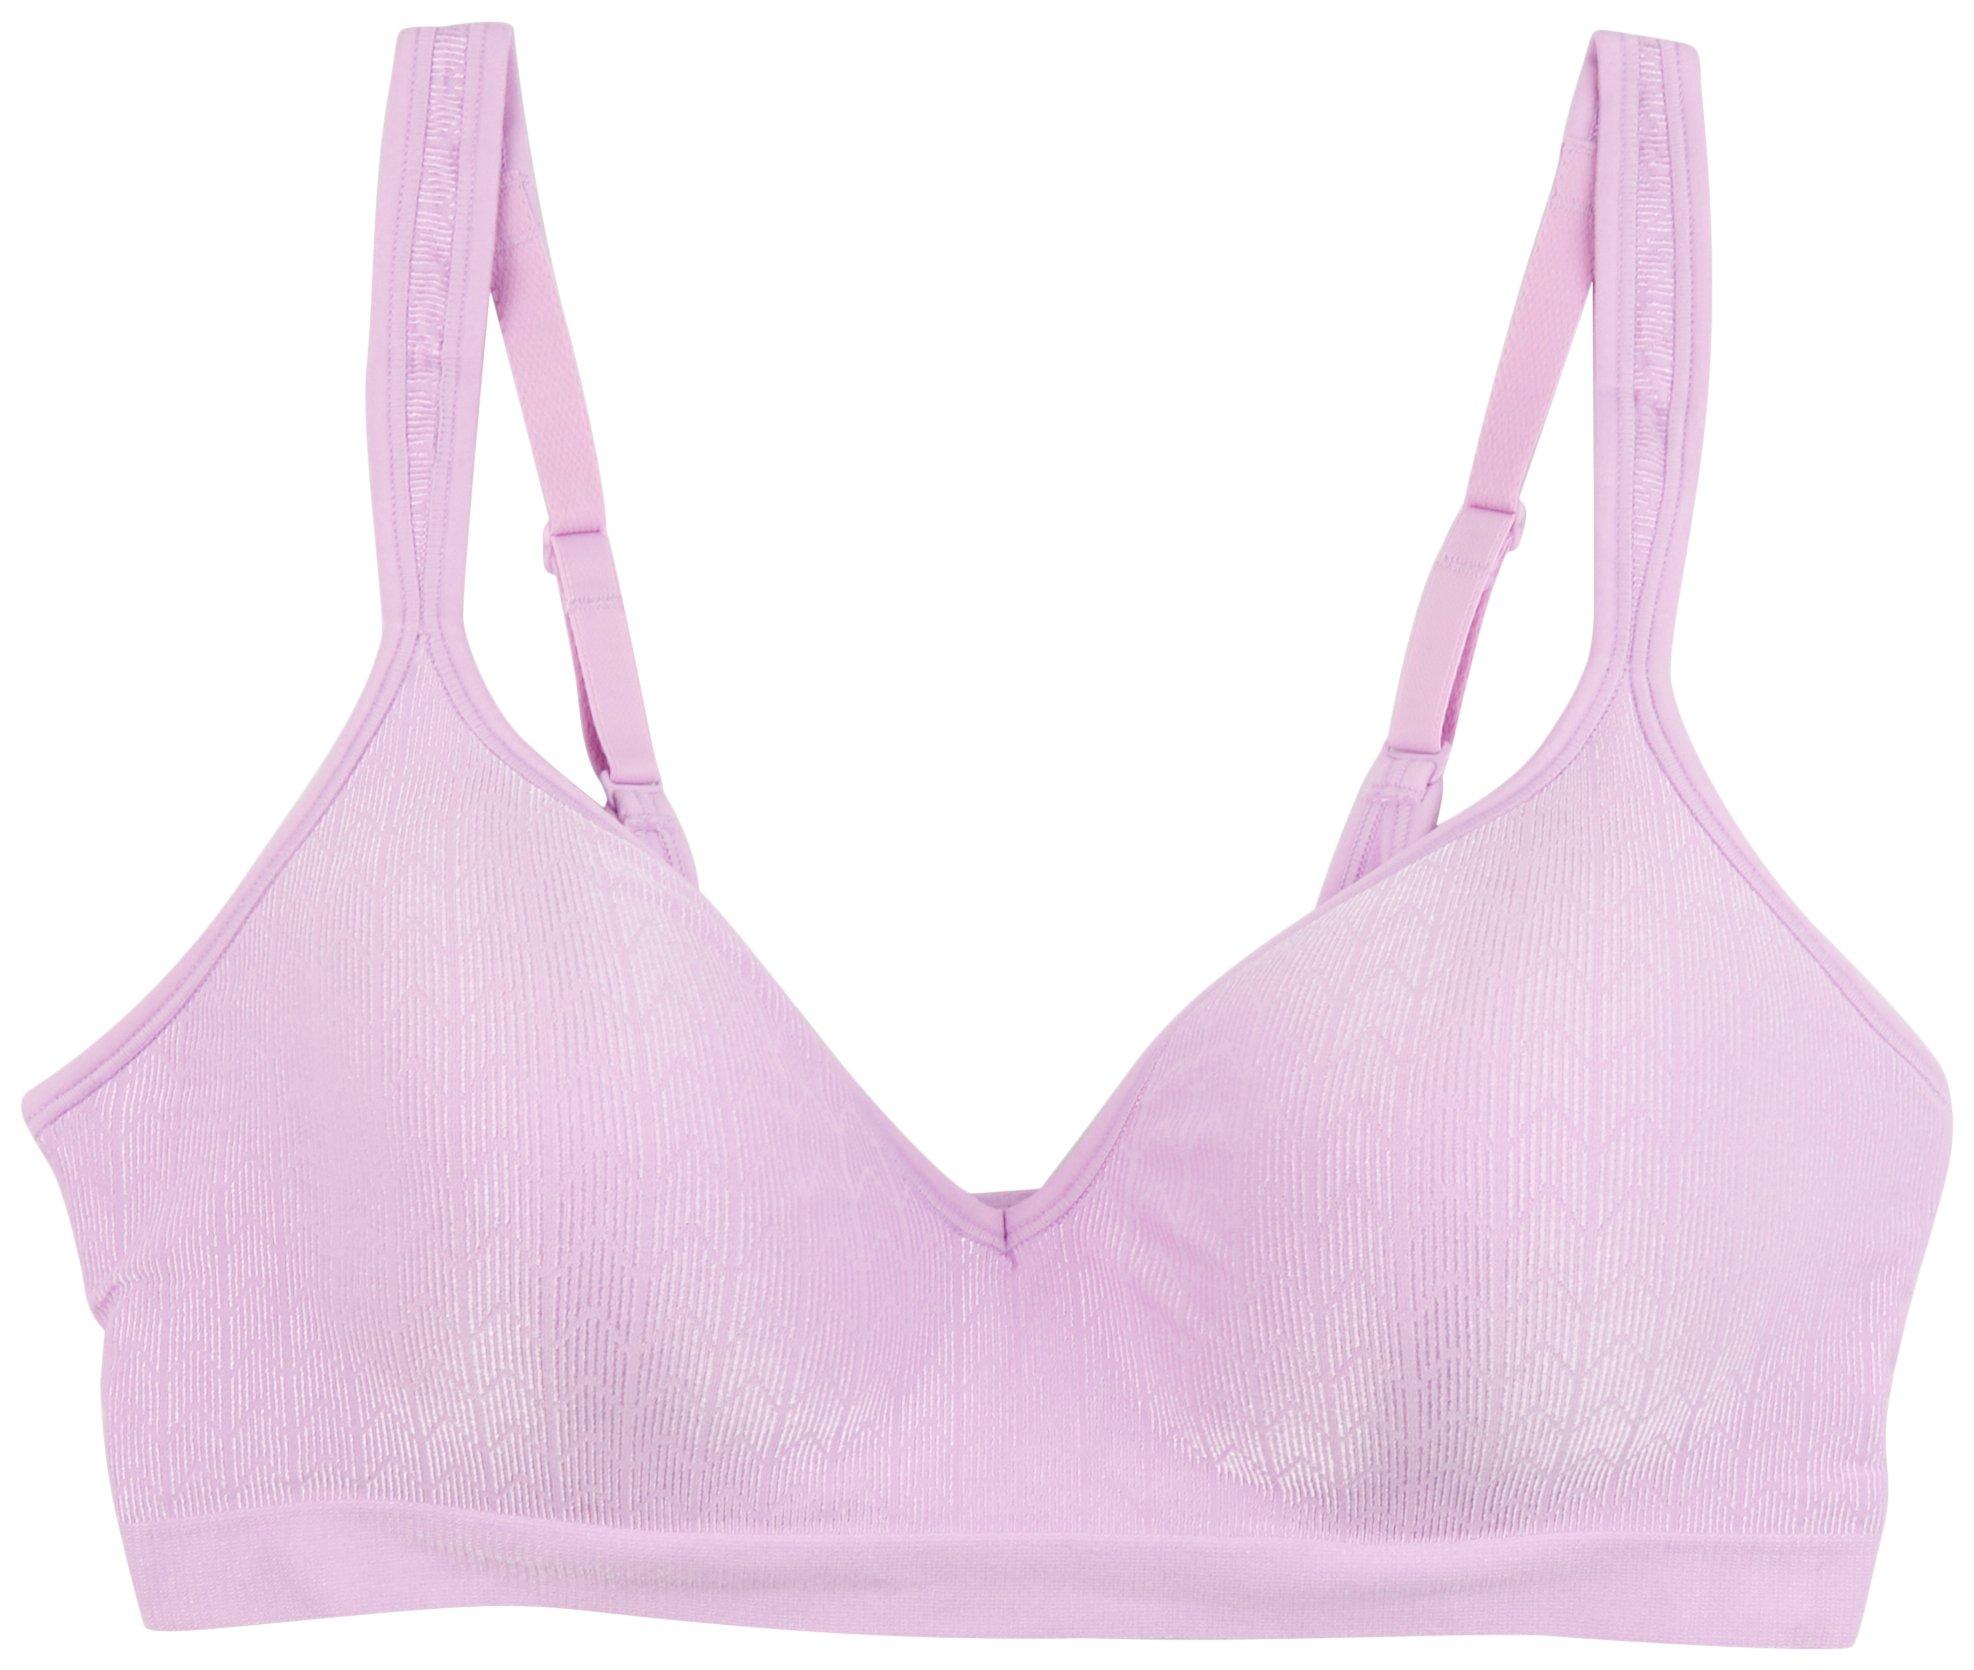 Cool Comfort Wirefree Bra Style 3463